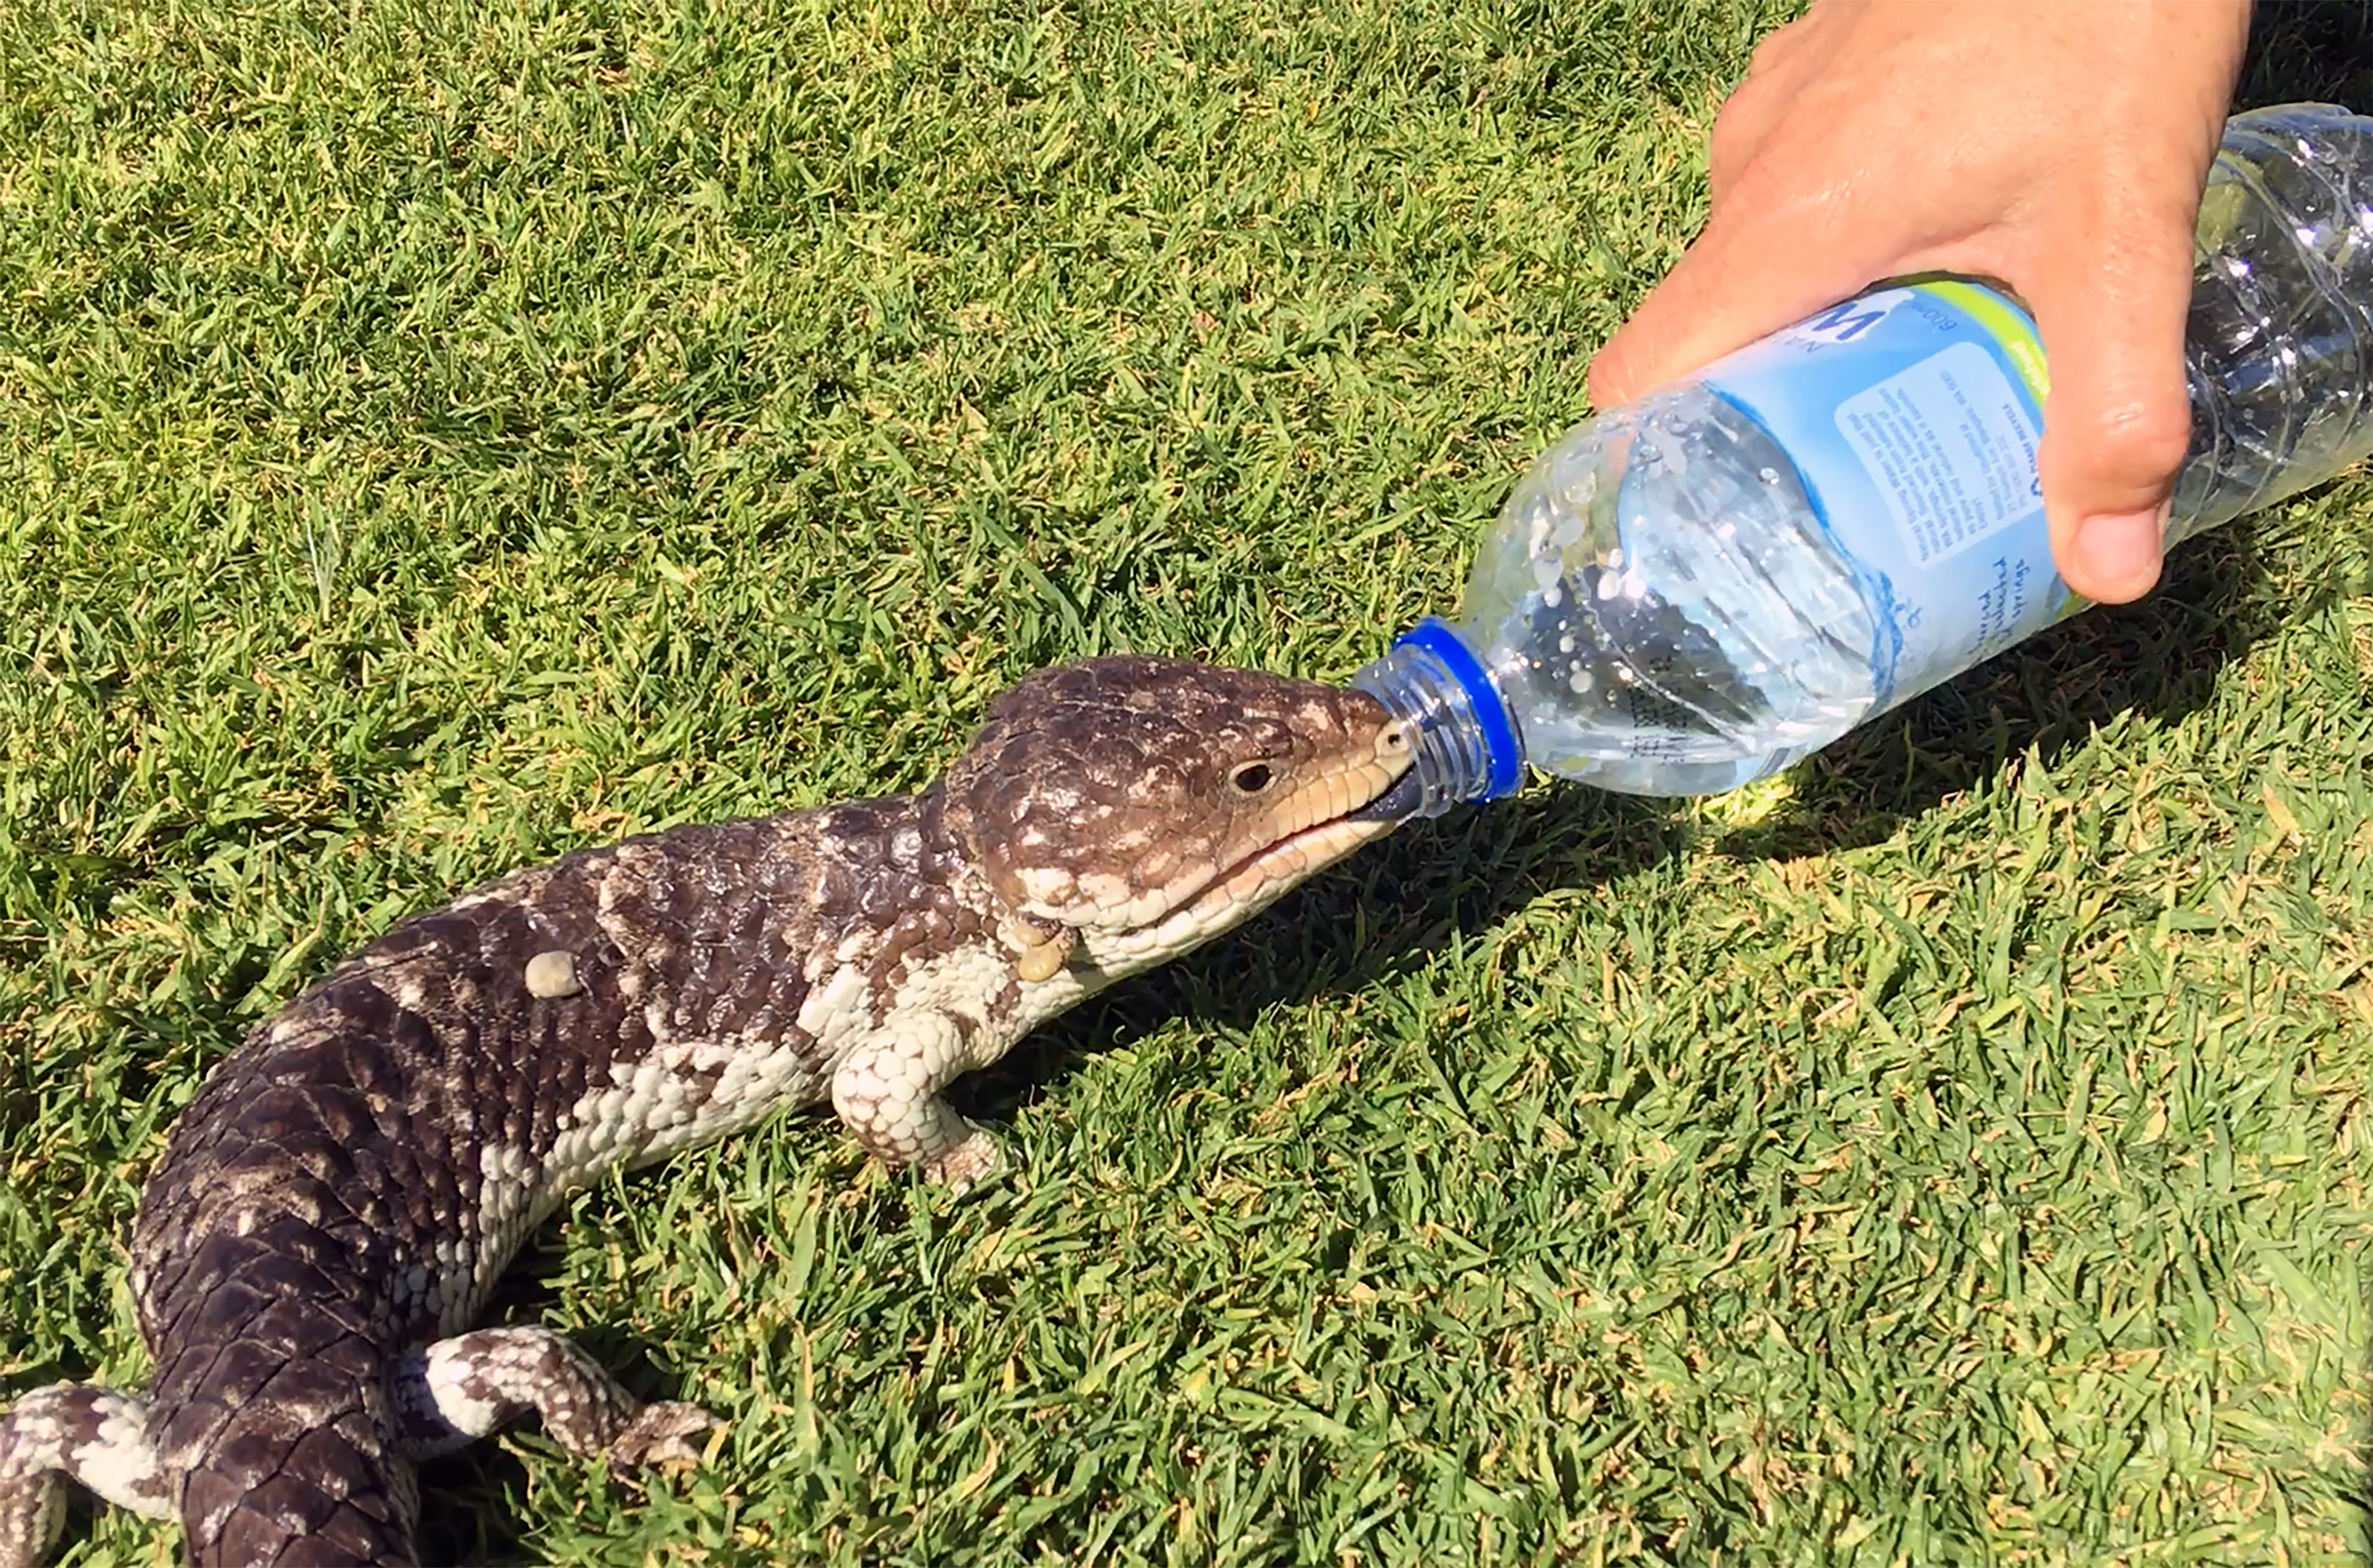 Wild lizards asking for water as parts of Austriala temperatures rise